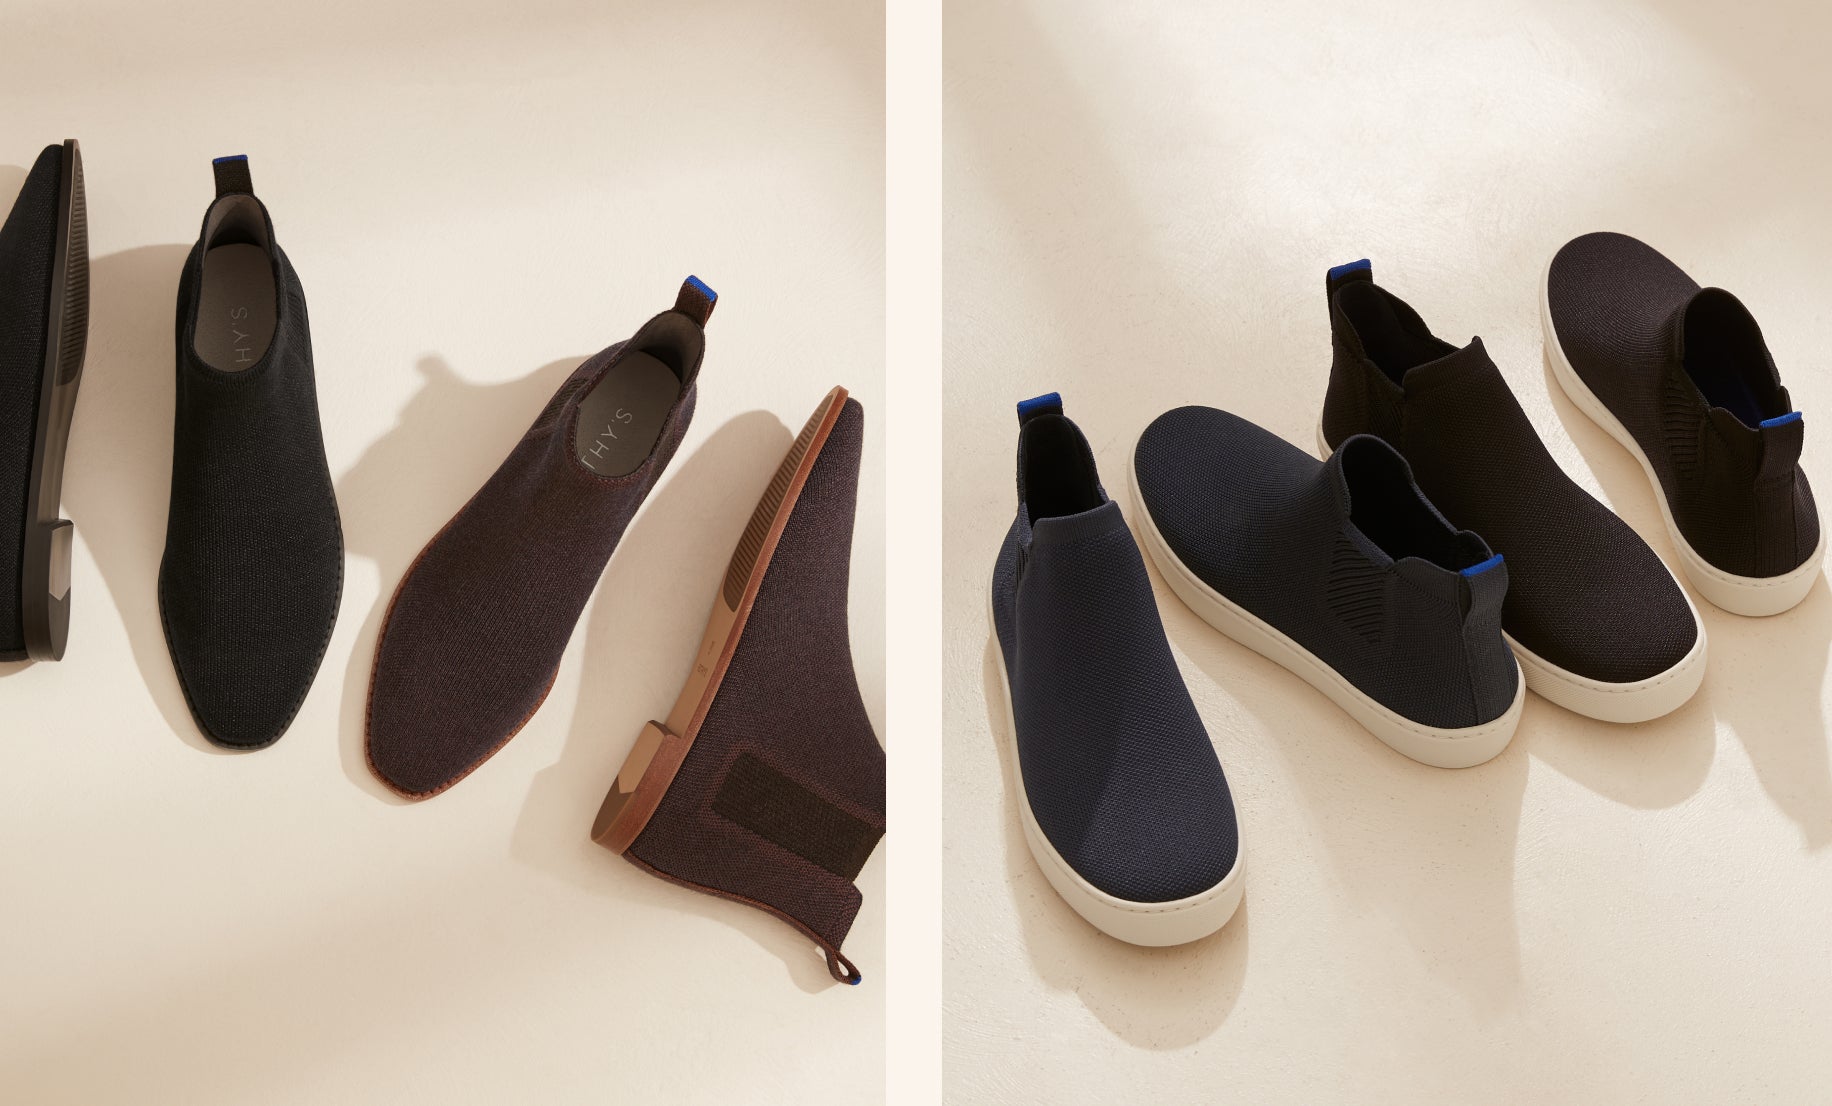 On the left, The Merino Ankle Boot in Onyx Black and Cocoa Brown. On the right, The Chelsea in Black and Nightfall. 